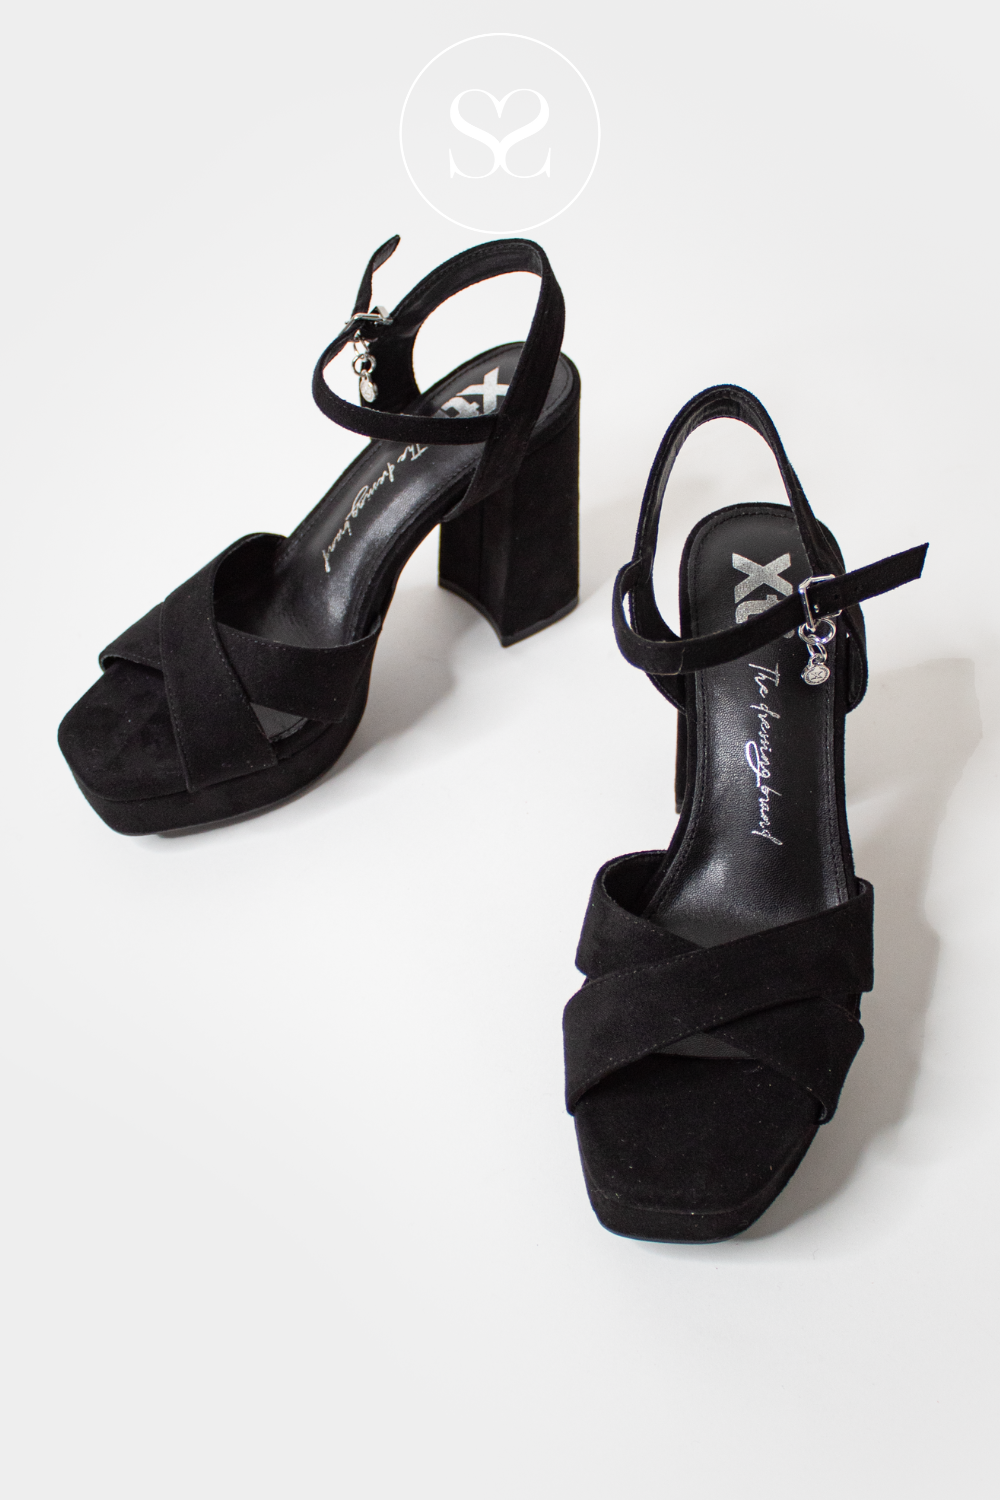 XTI 142357 BLACK PLATFORM BLOCK HEELS WITH CROSS STRAPS AND ADJUSTABLE ANKLE STRAP